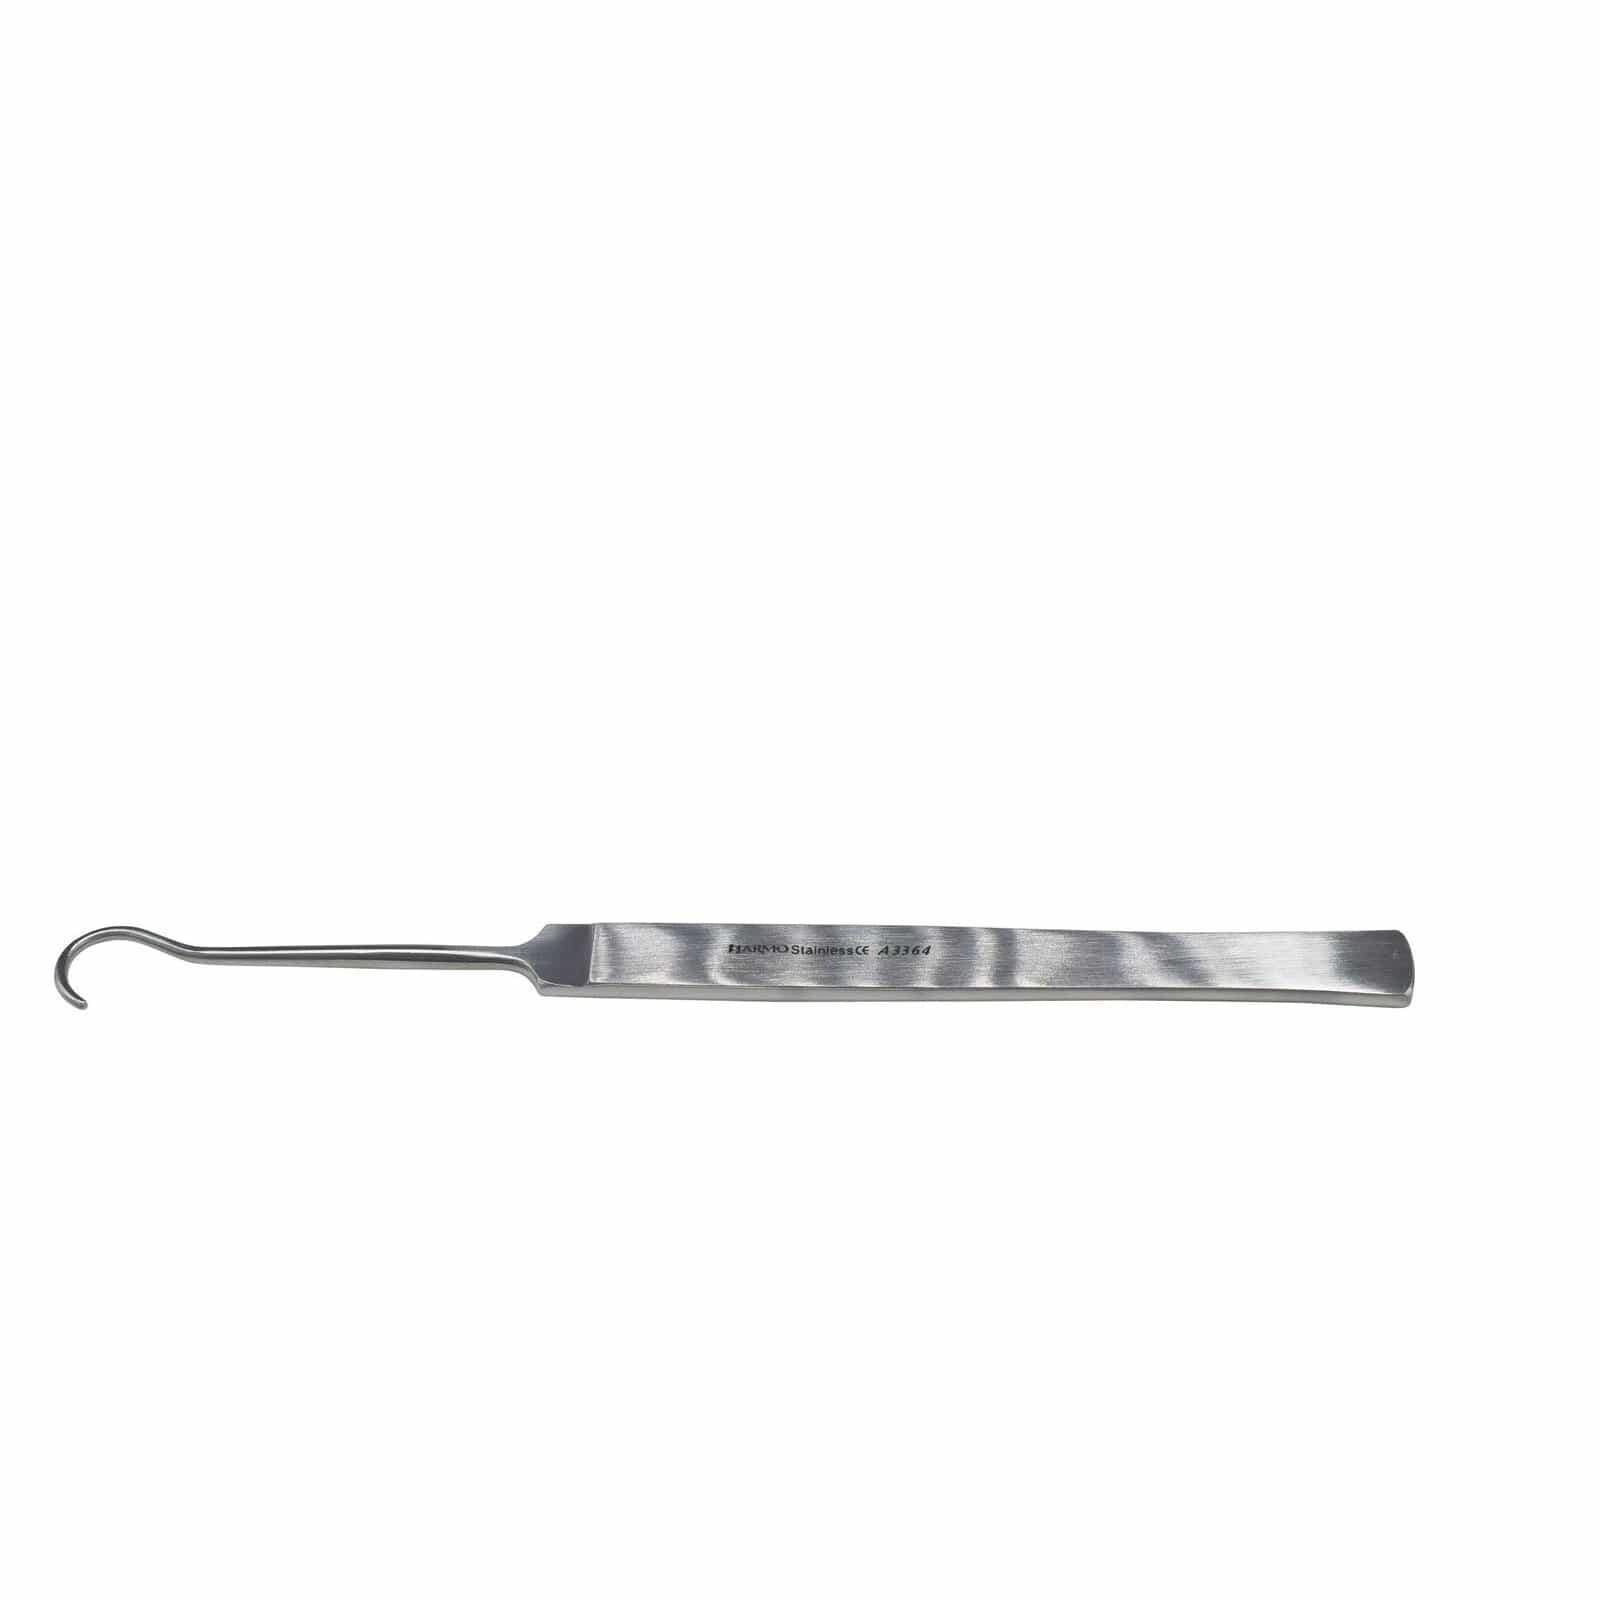 Armo 16cm / Blunt Armo Tracheal Hook 1 Prong